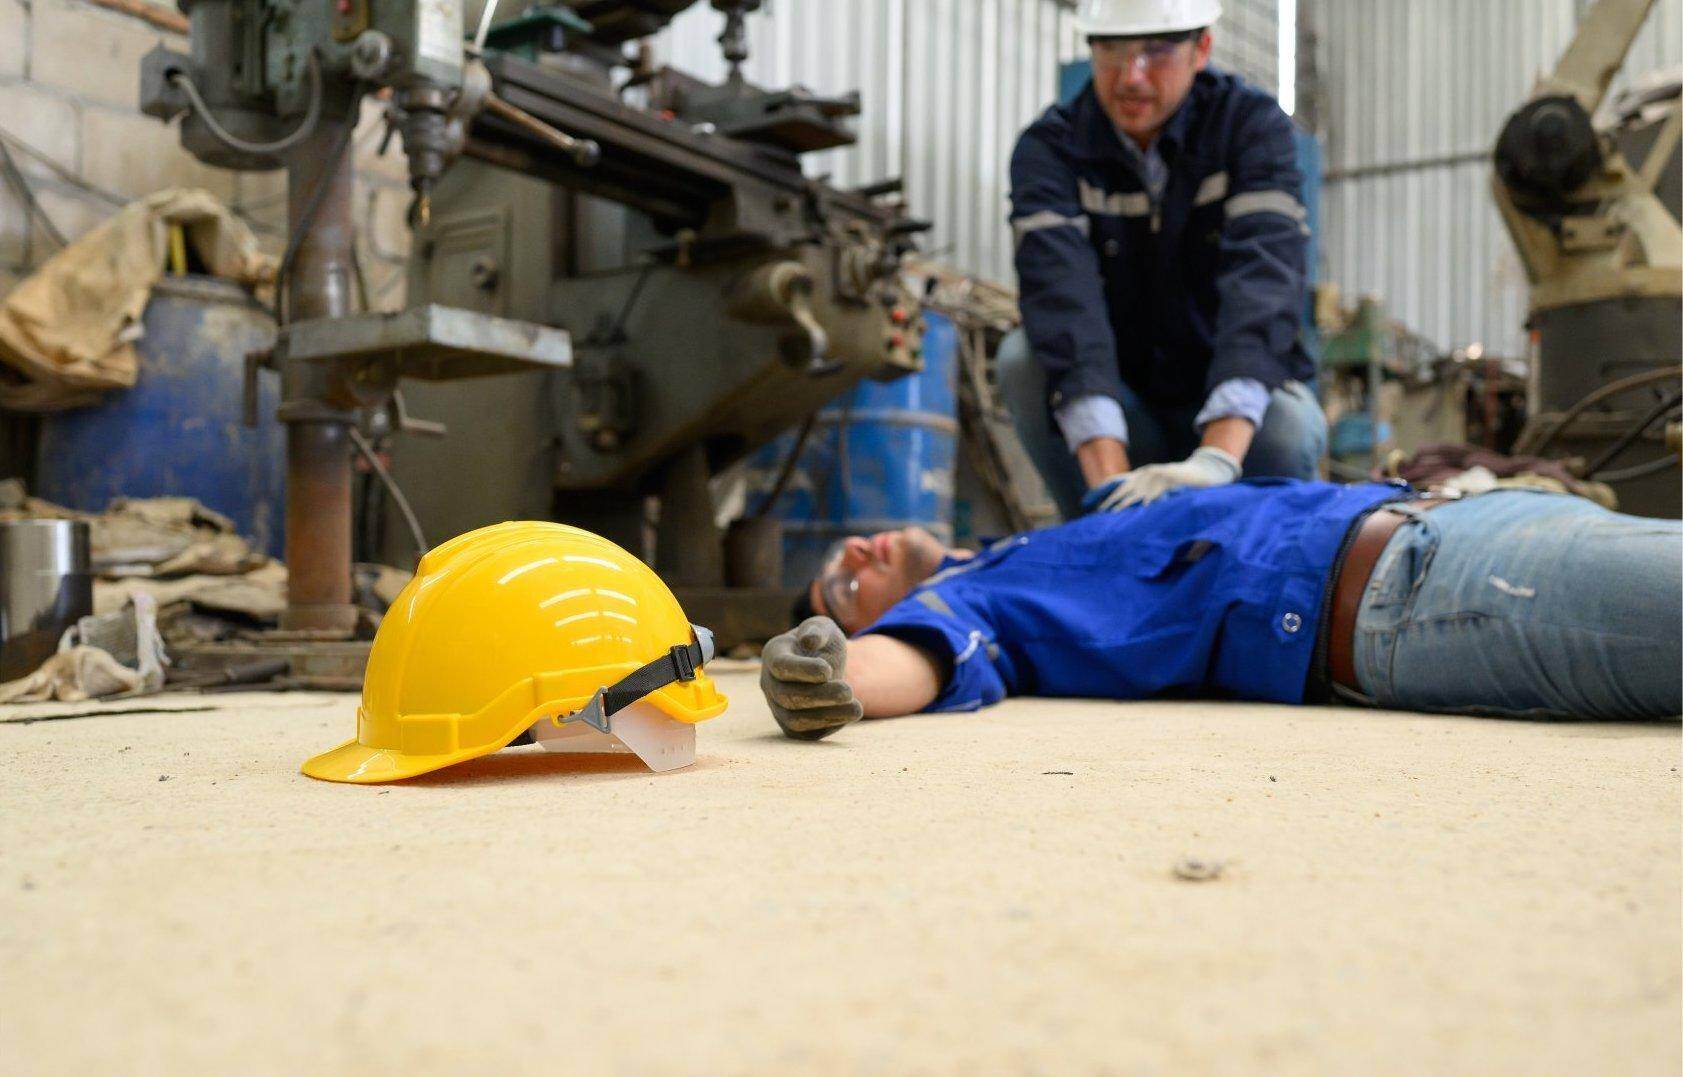 An unconscious man who has been injured on the job who will file for workers compensation in Decatur, Georgia